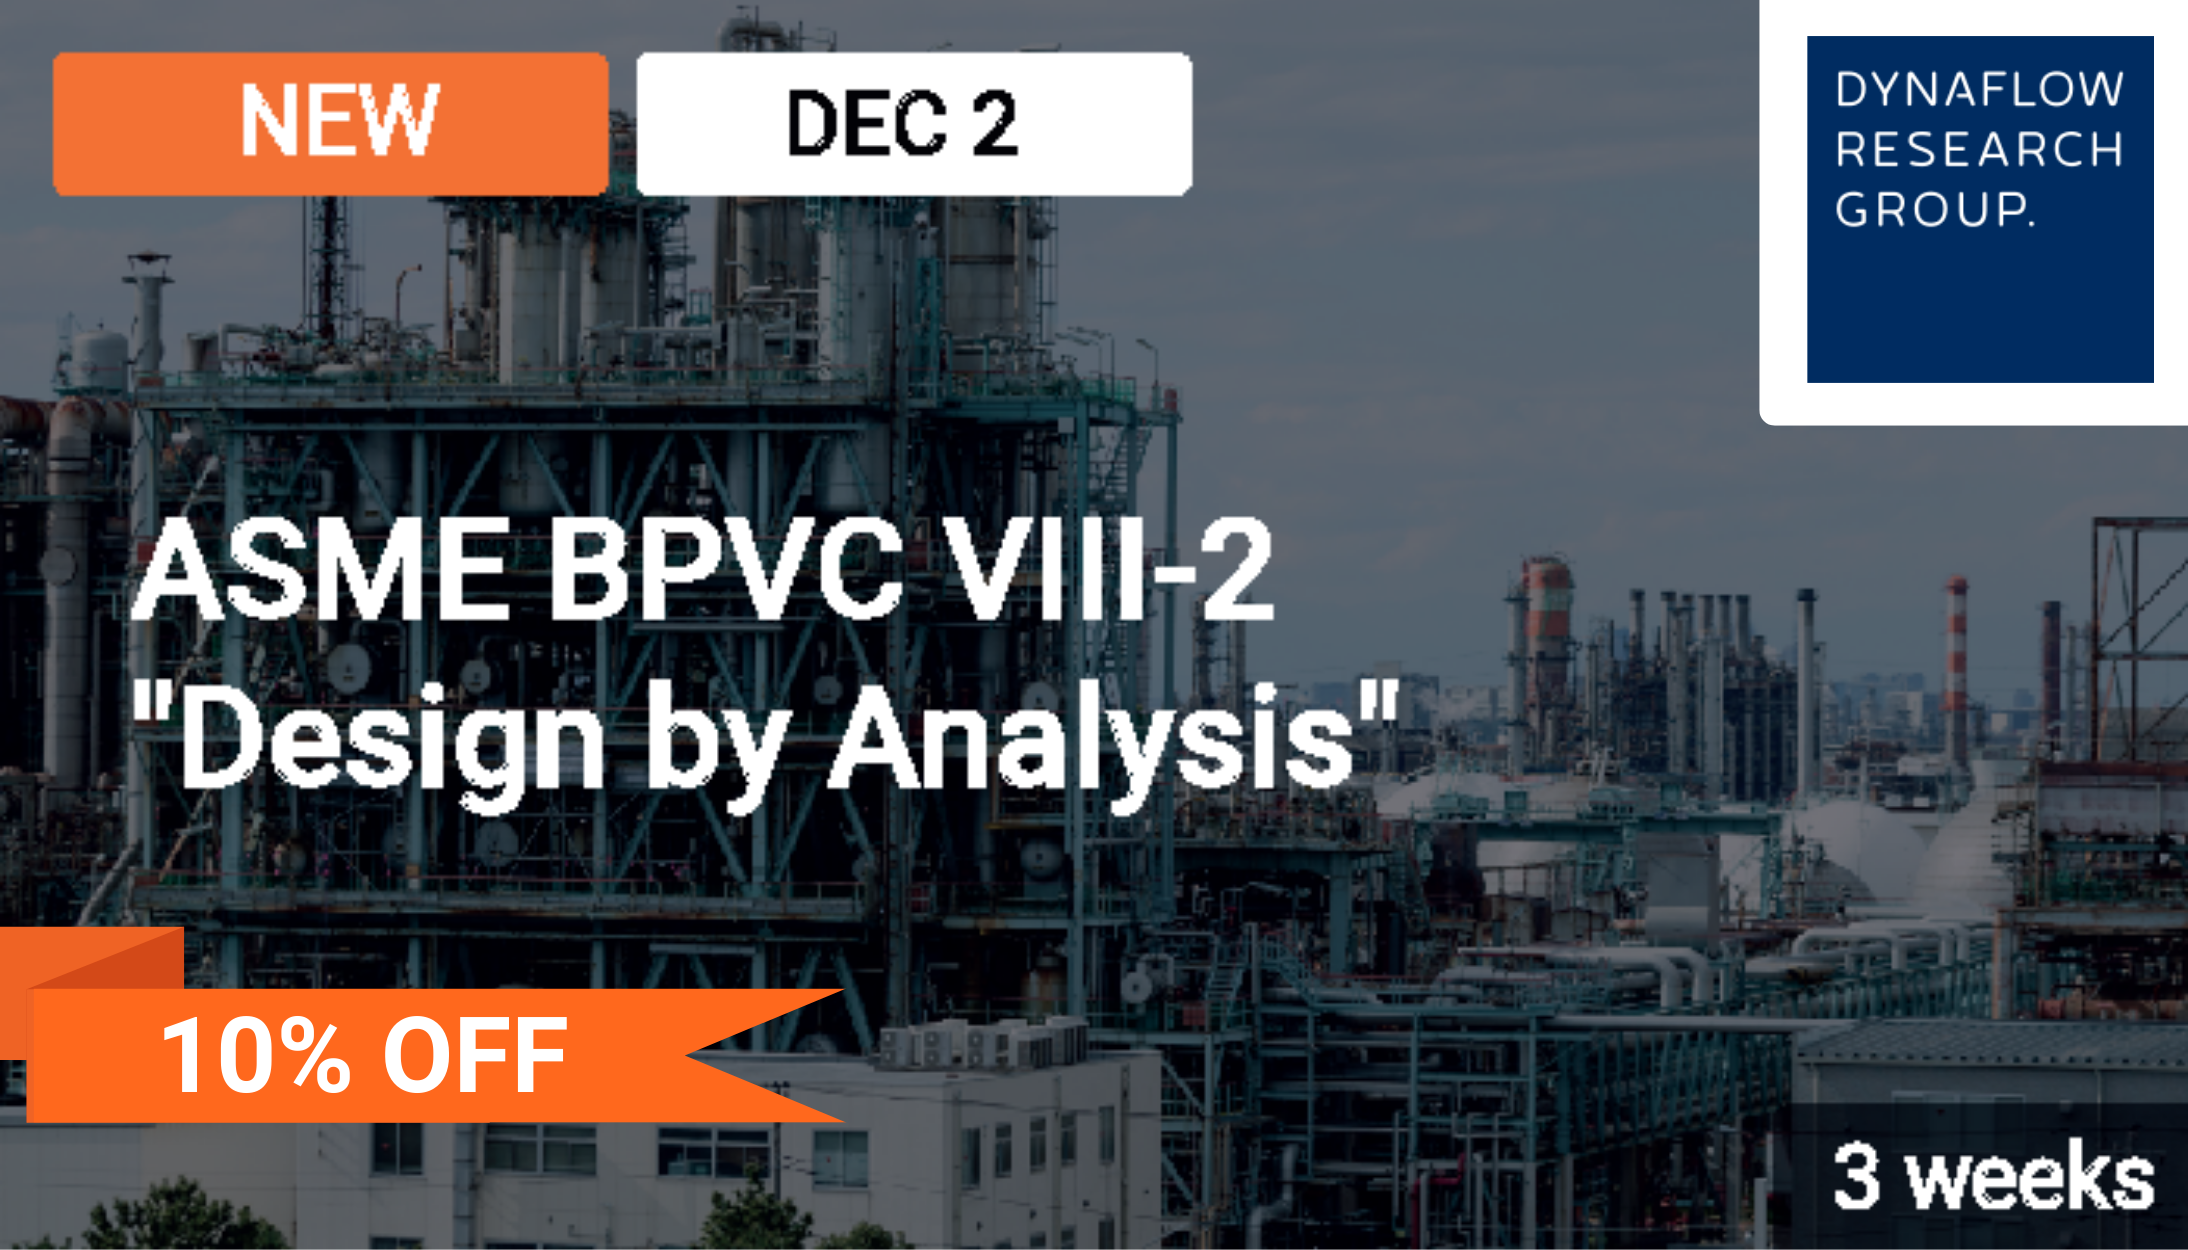 Working with ASME VIII-2 chapter 5: “Design by Analysis”